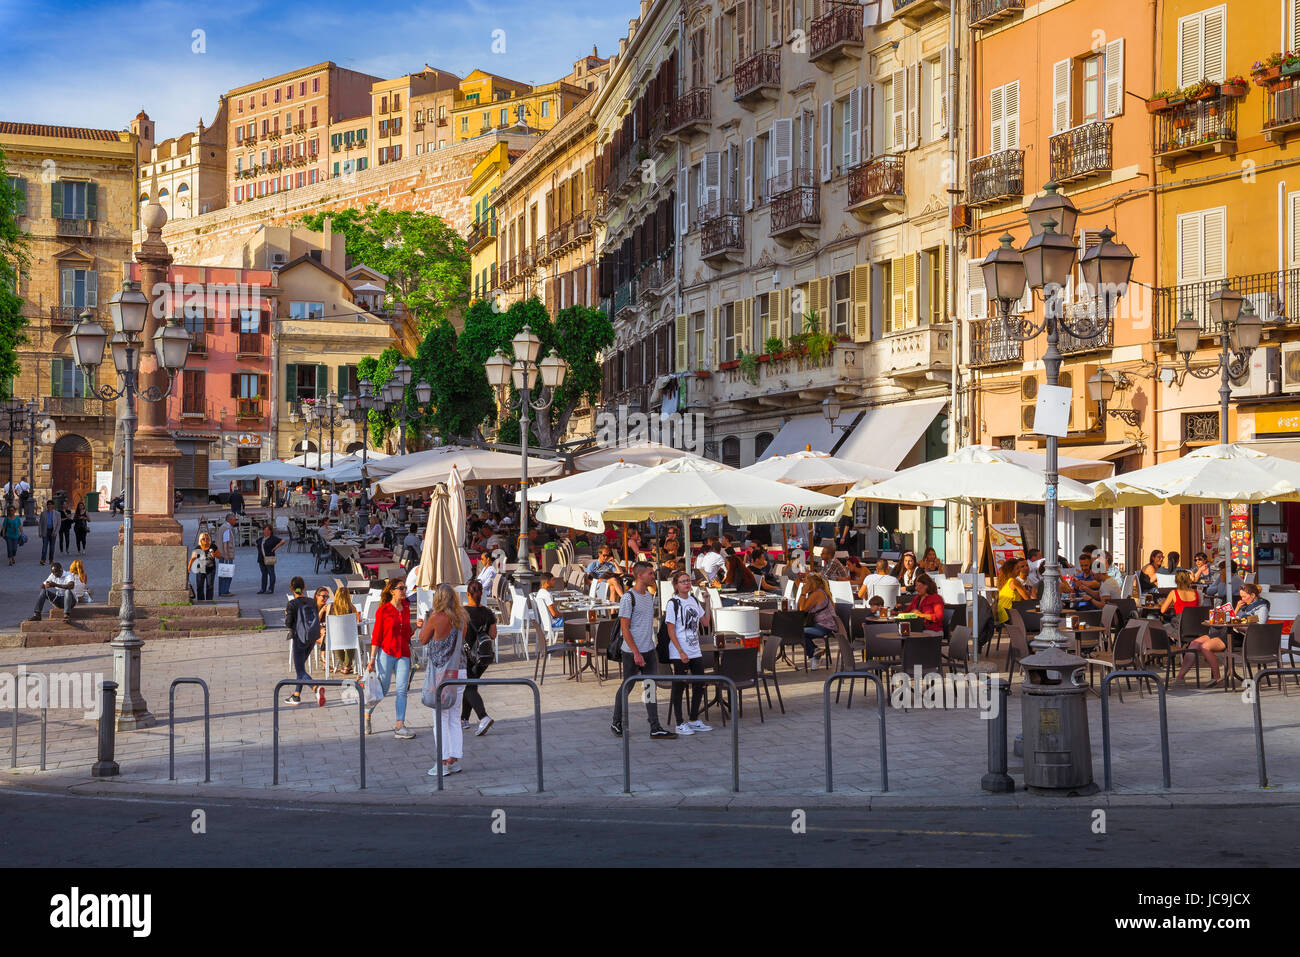 Cagliari Sardinia center, the Piazza Yenne in the Stampace quarter of Cagliari is the city's central location for bars and cafes during summer. Stock Photo